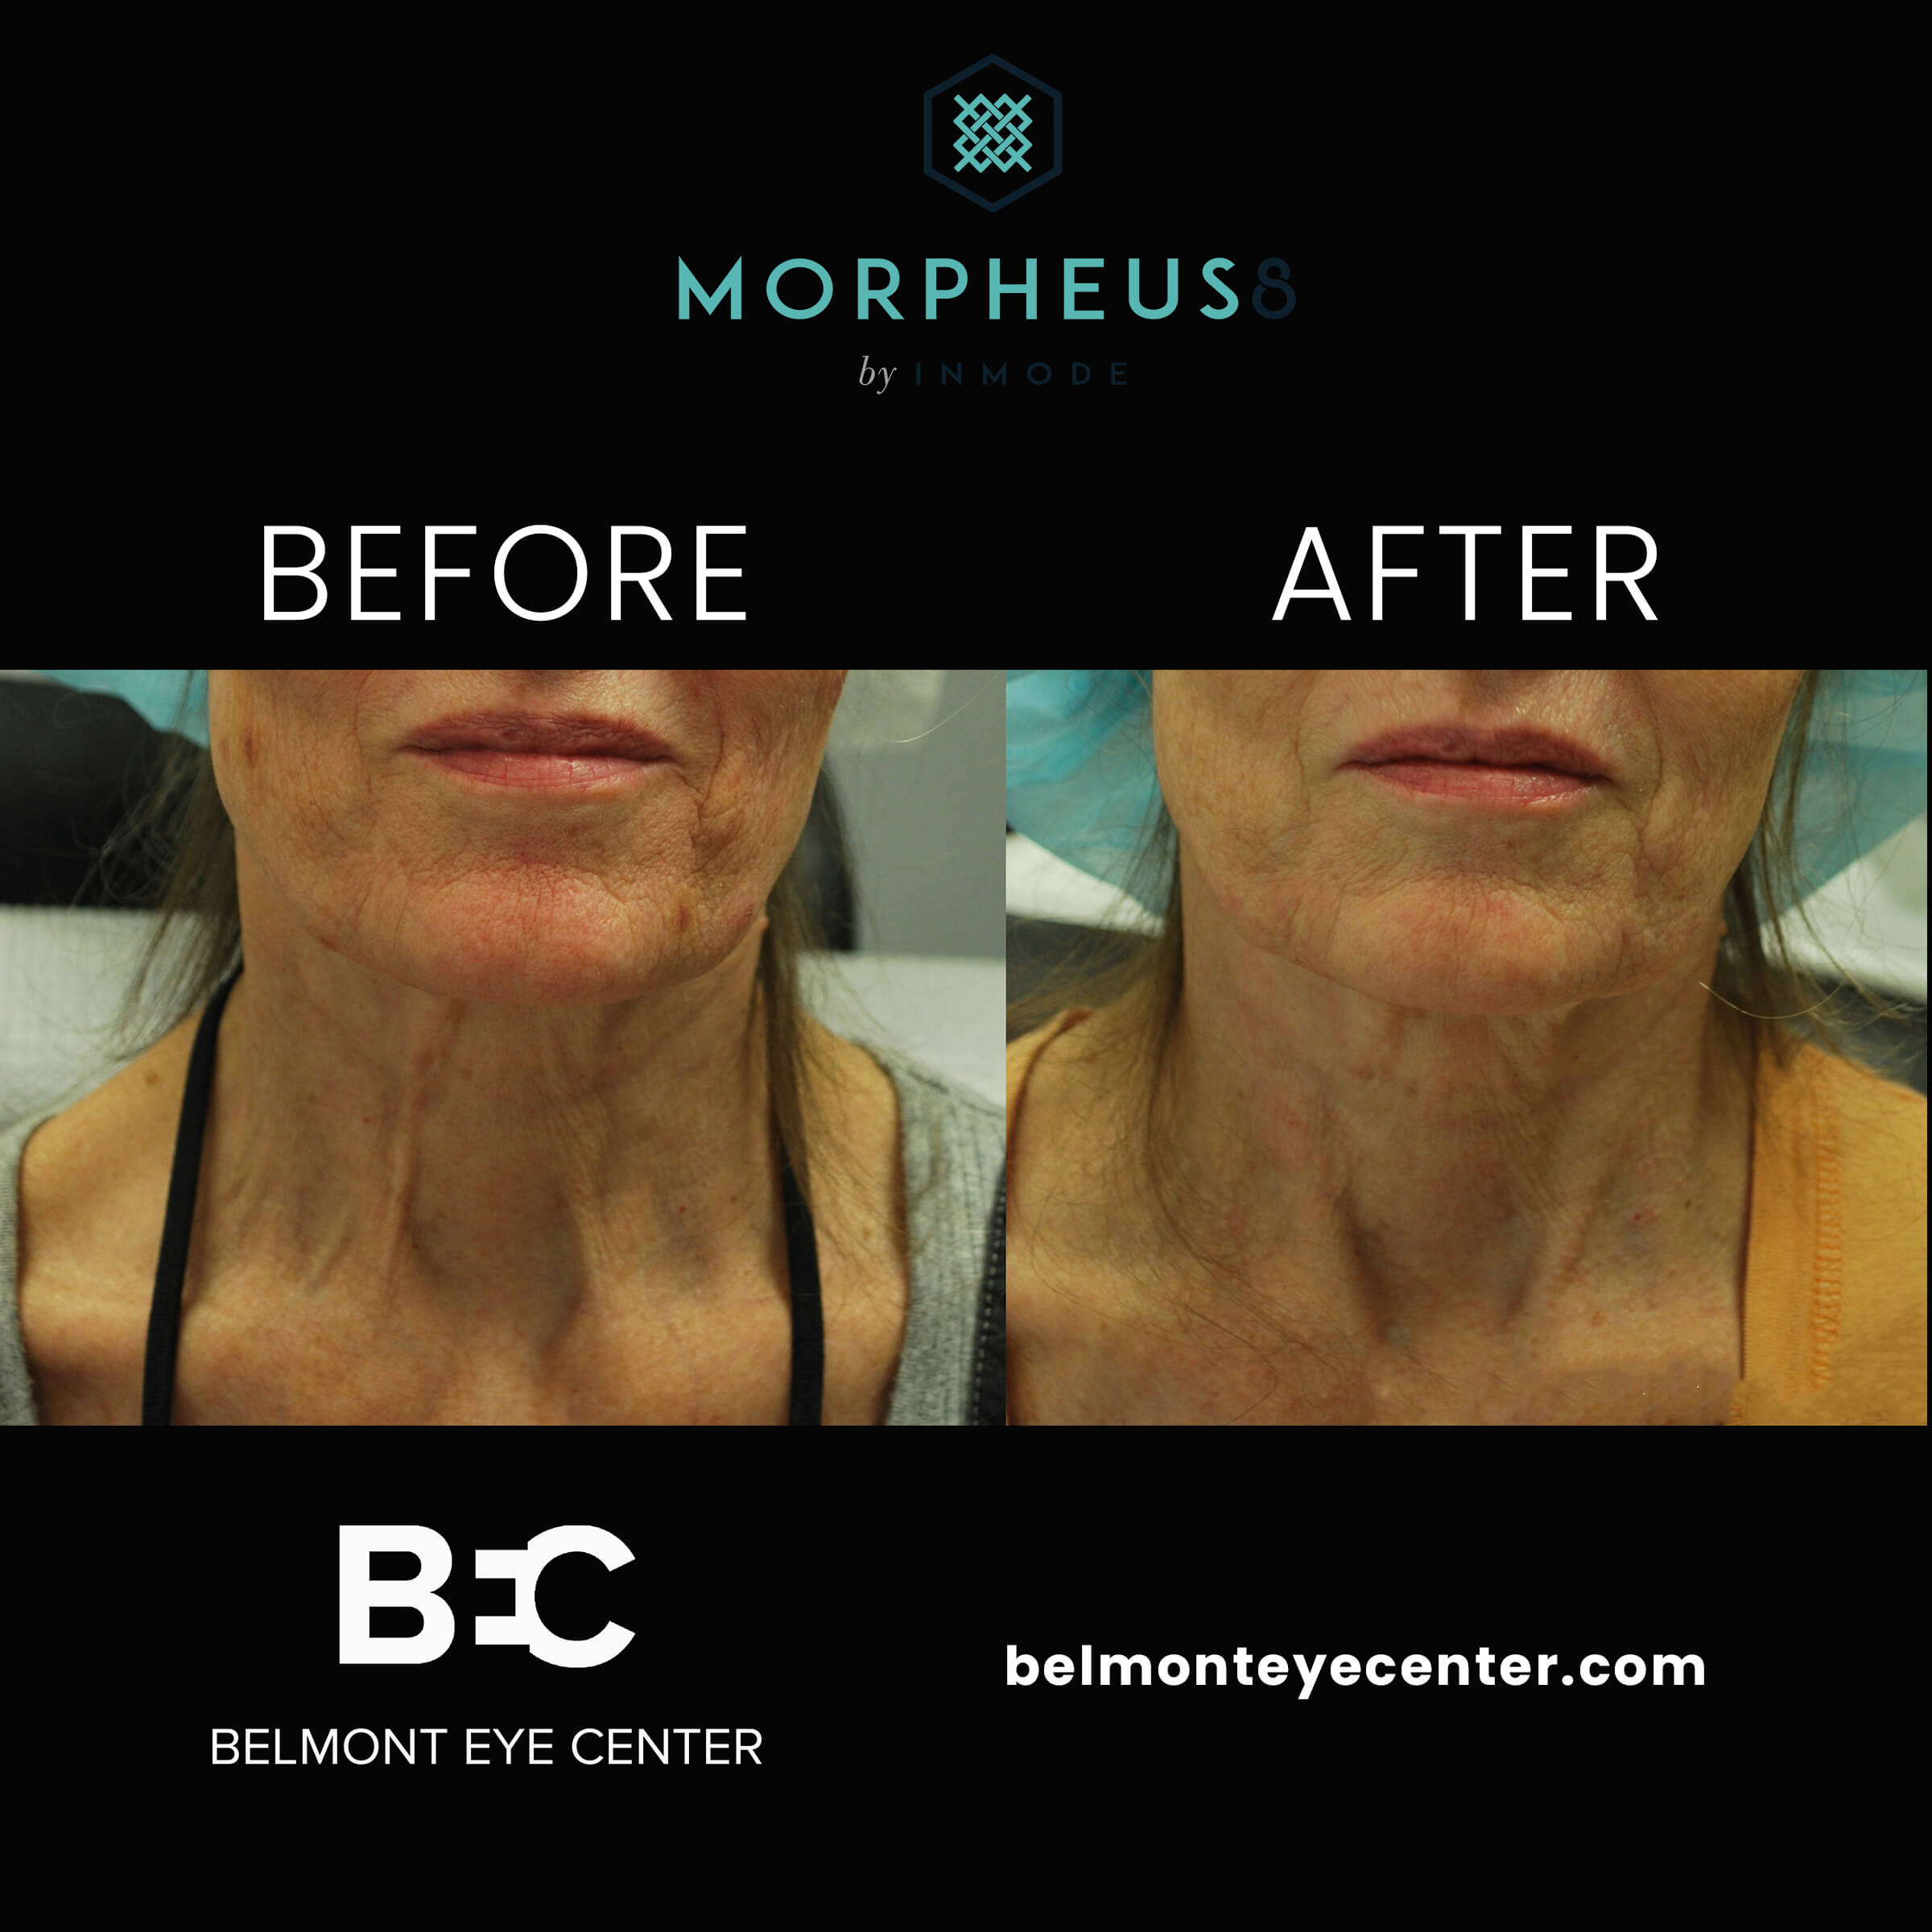 Before and After Treatment Images